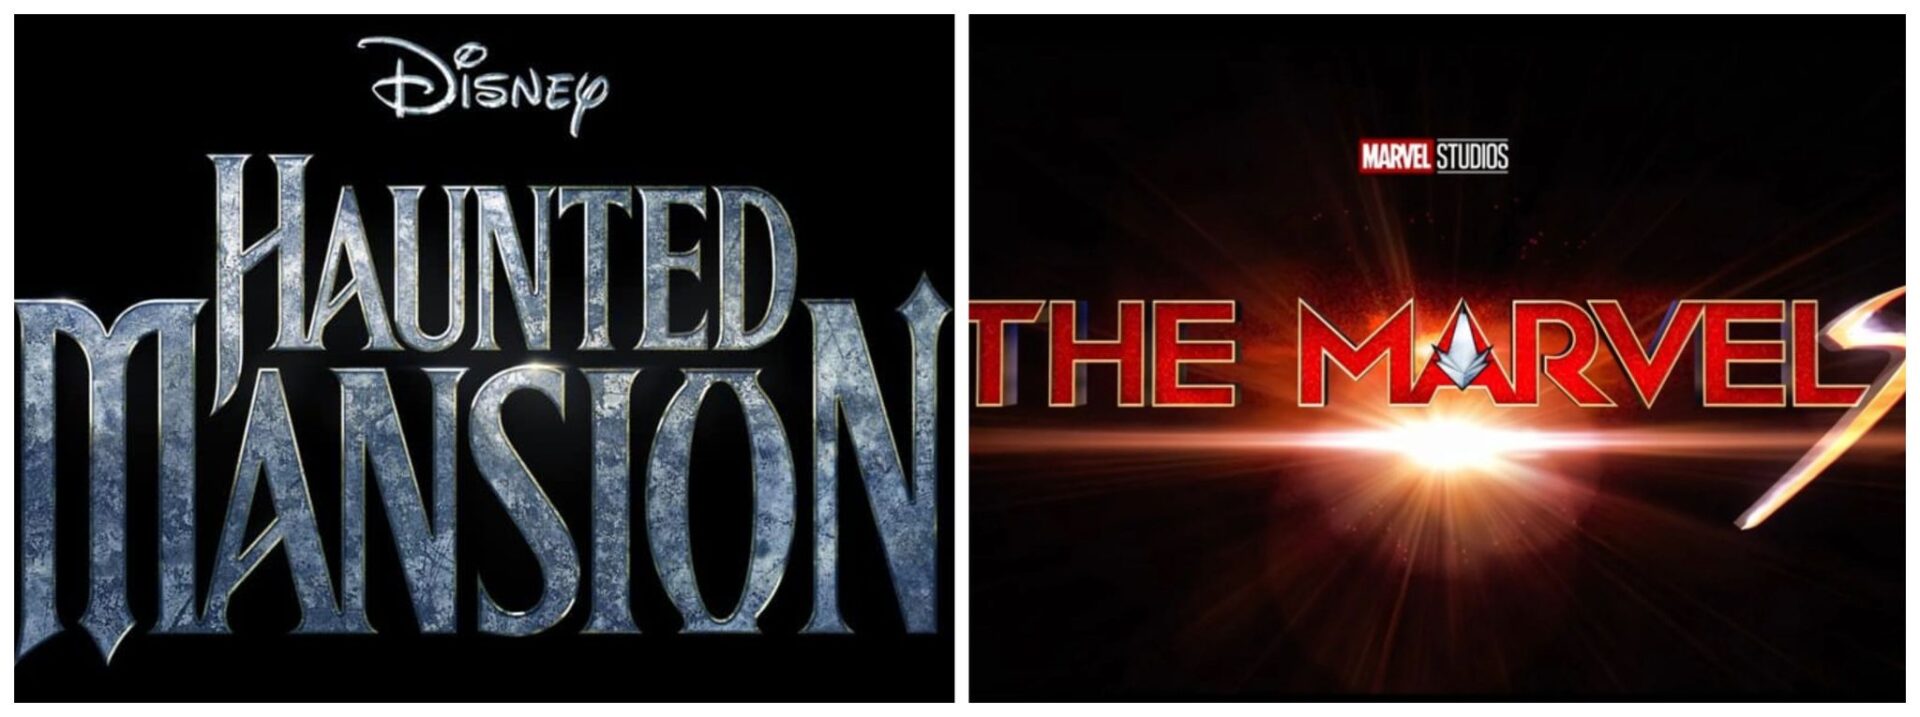 The Marvels Movie was Pushed Back To November and Haunted Mansion Moved Up